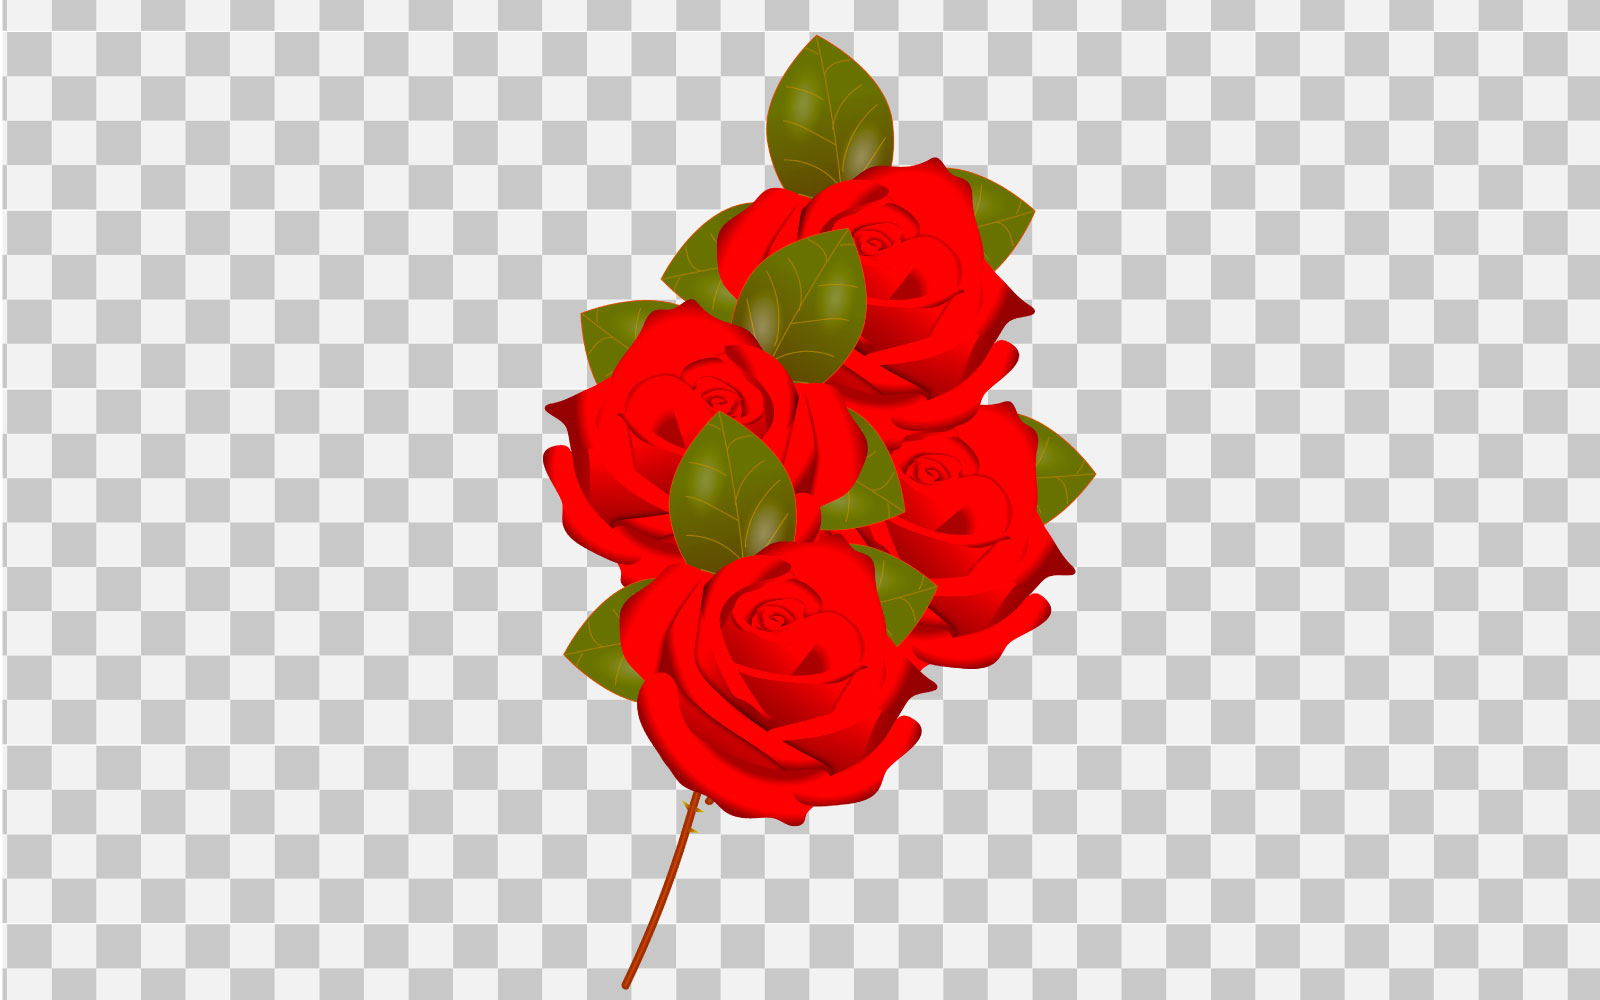 Rose realistic rose leaf and bud with red flower